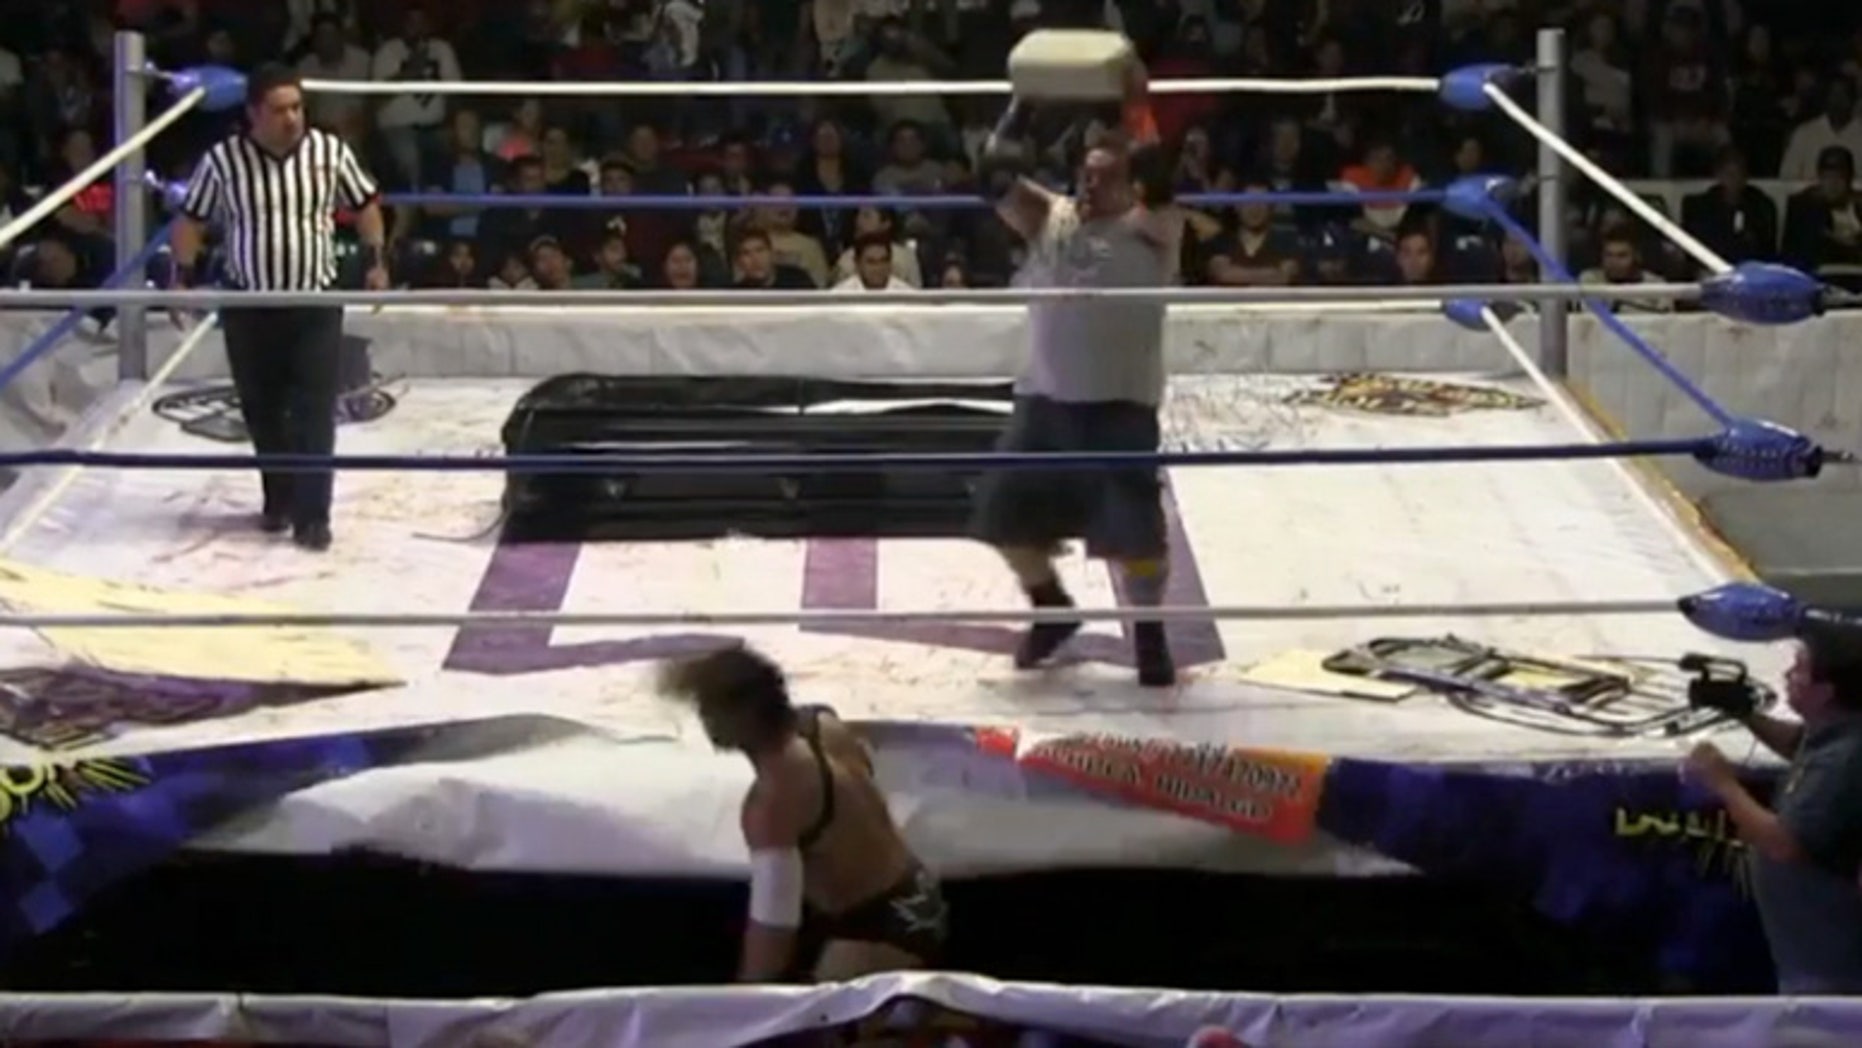 Professional wrestler Cuervo (The Raven) was hit by a brick in a recent match.